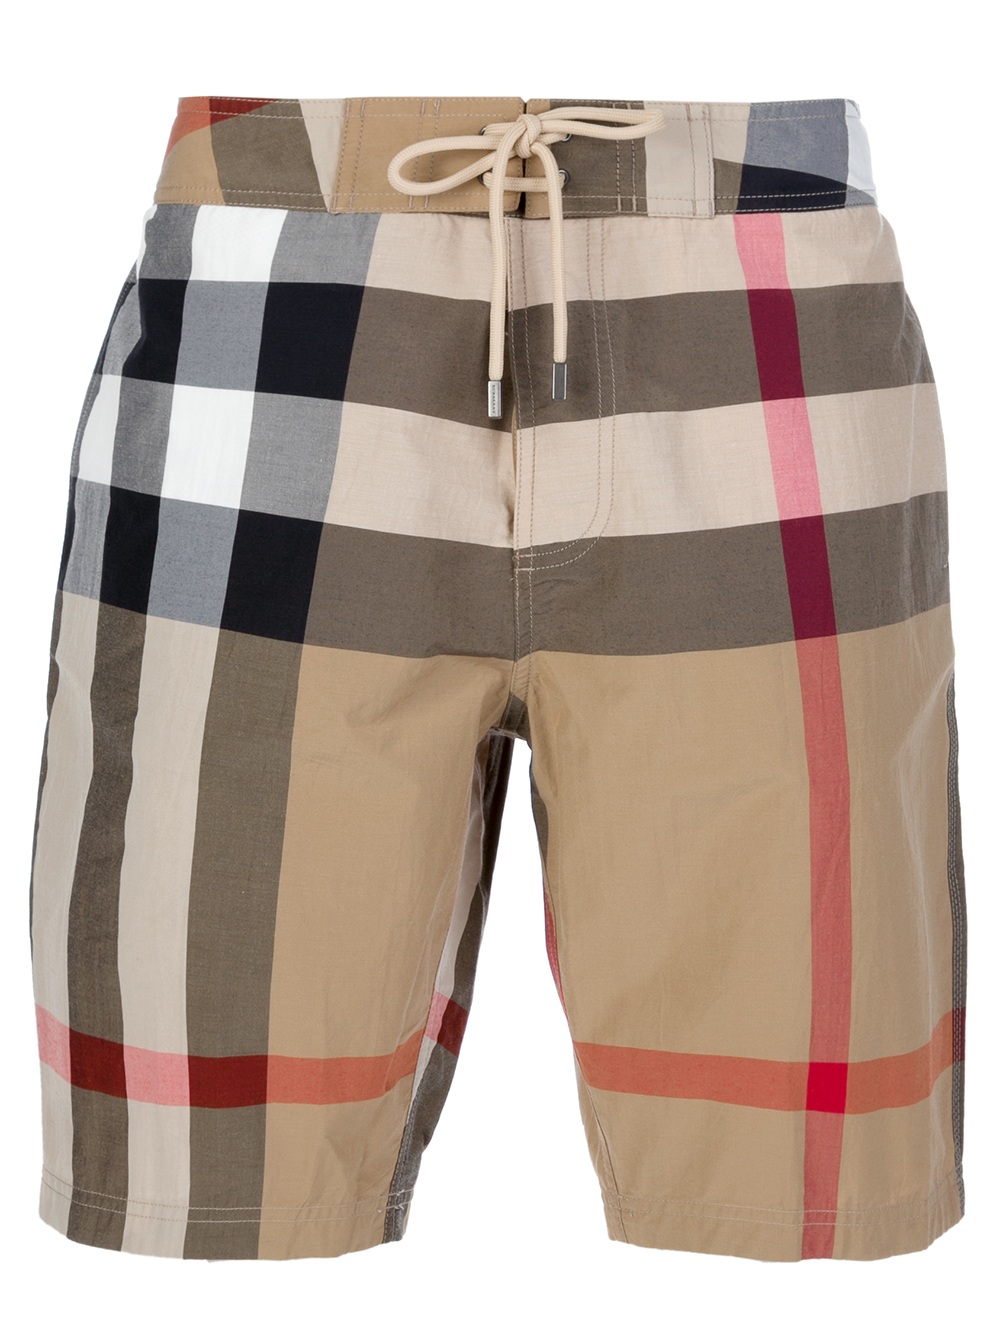 burberry shorts sale Online Shopping 